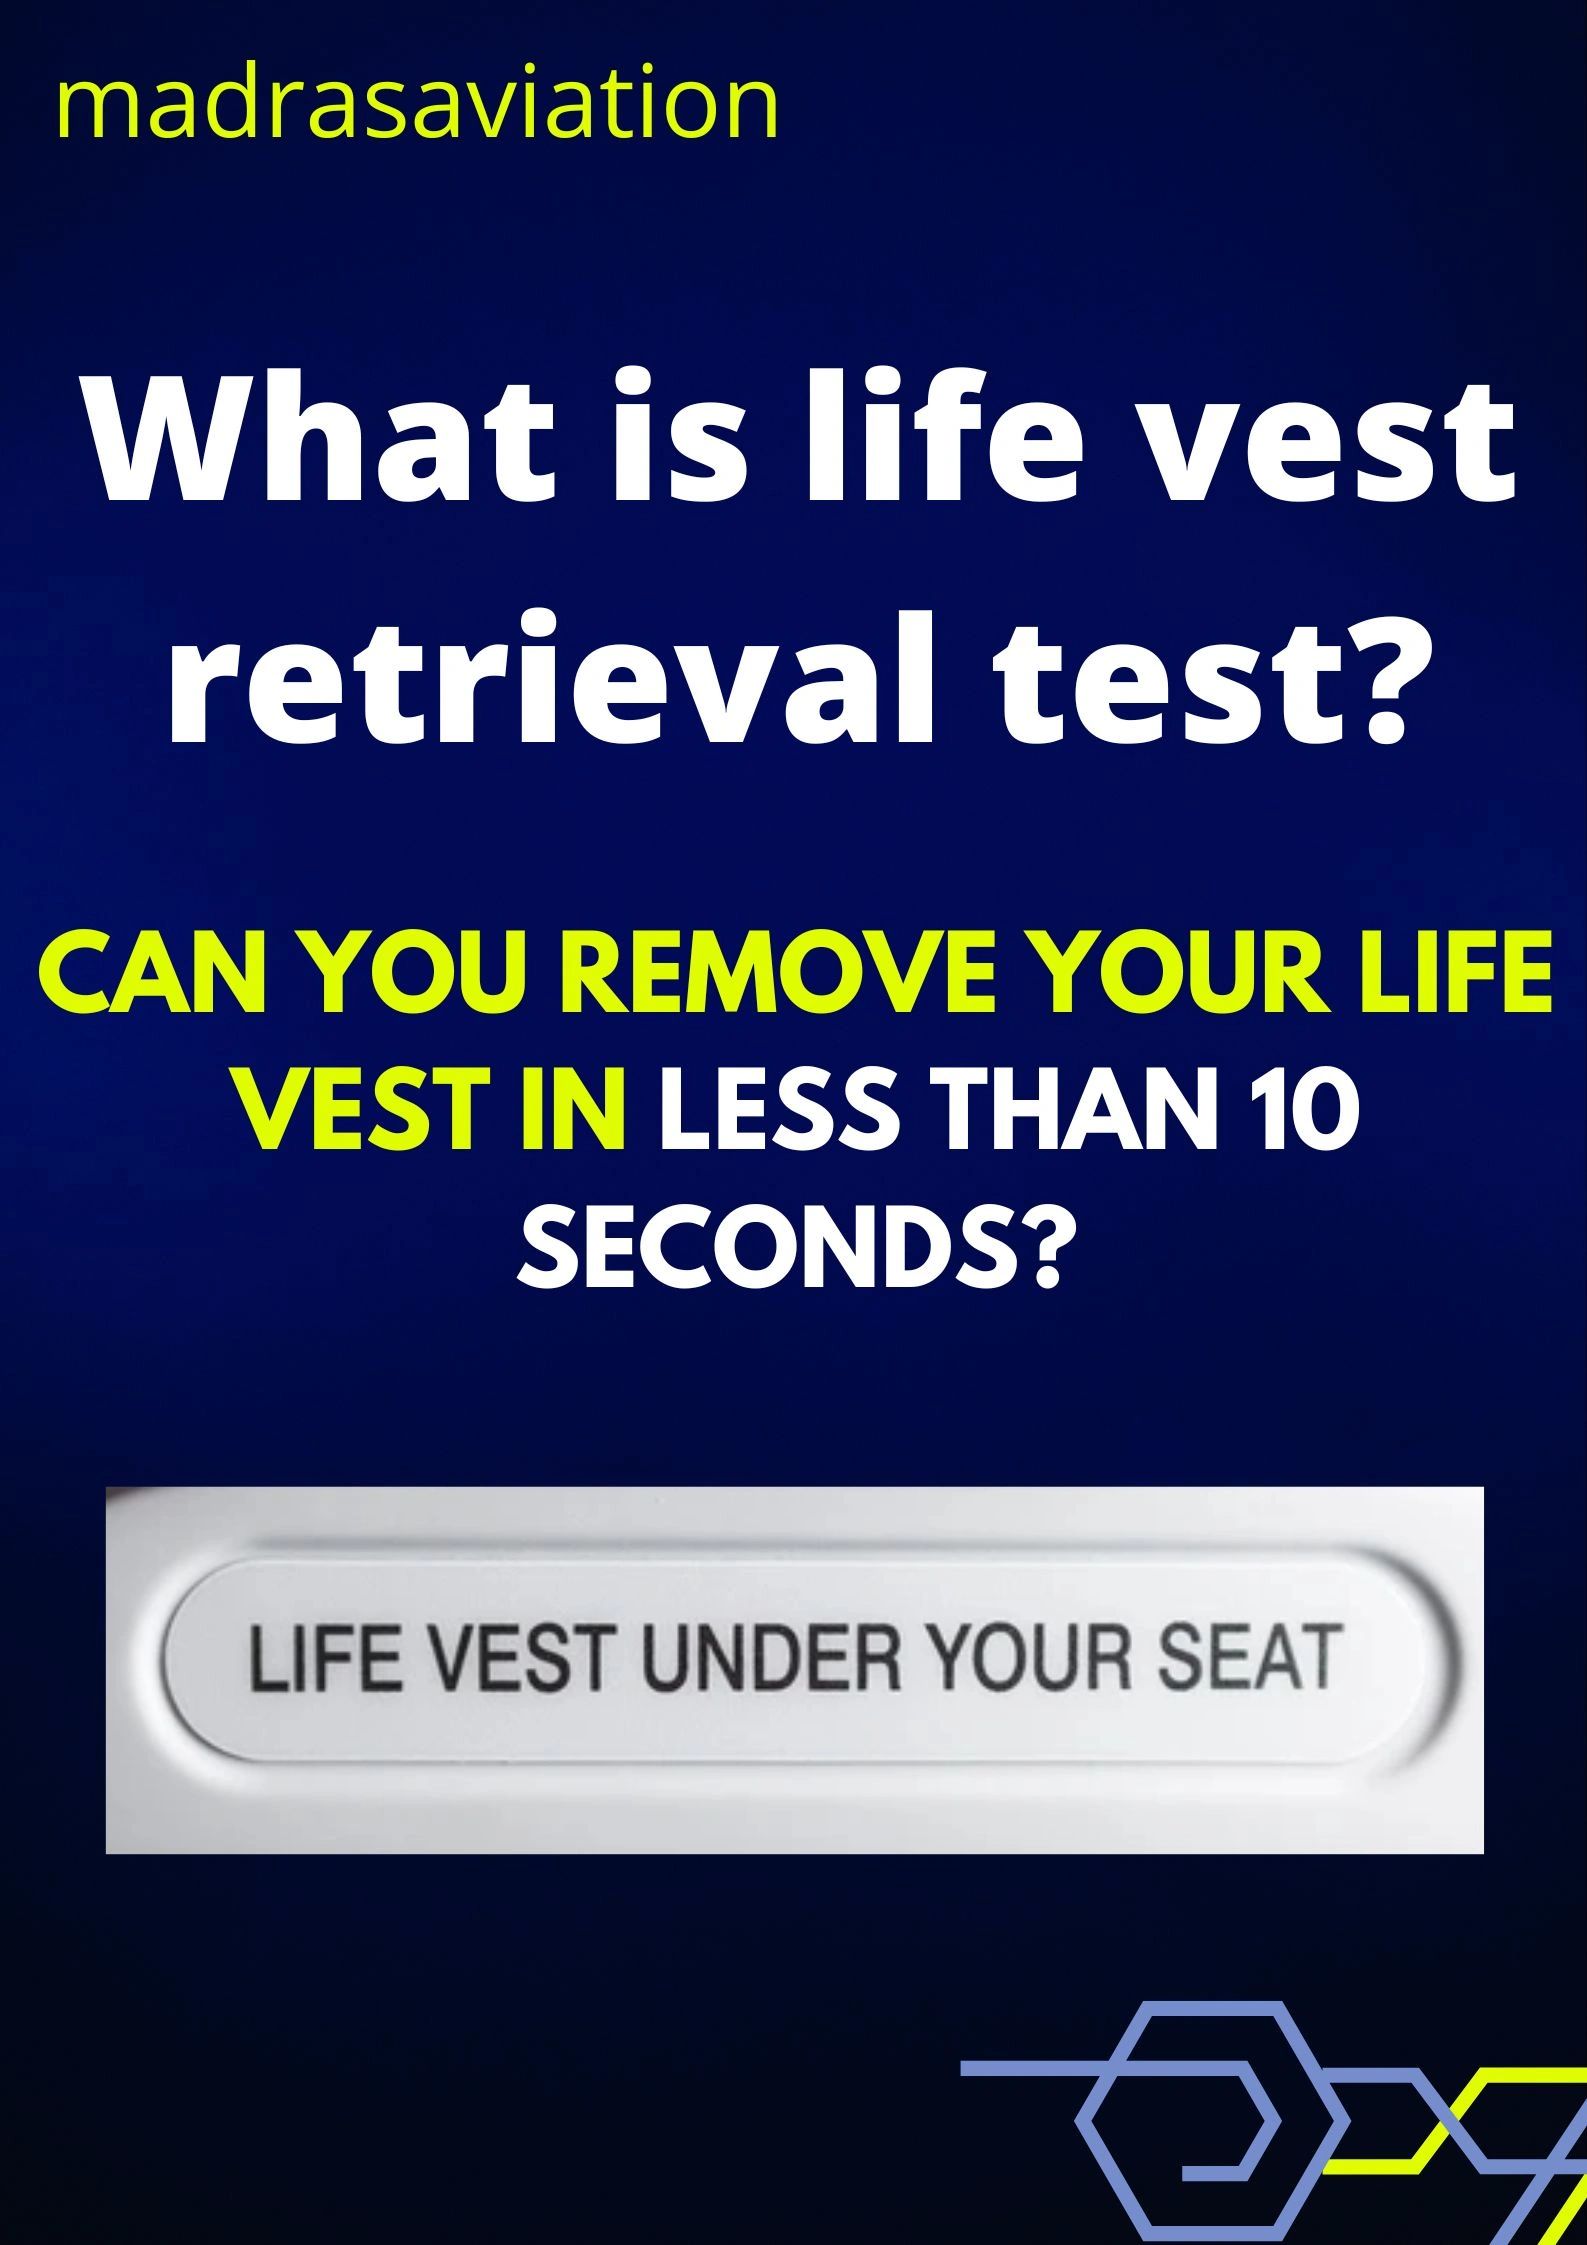 What is life vest retrieval test in Aircraft certification?